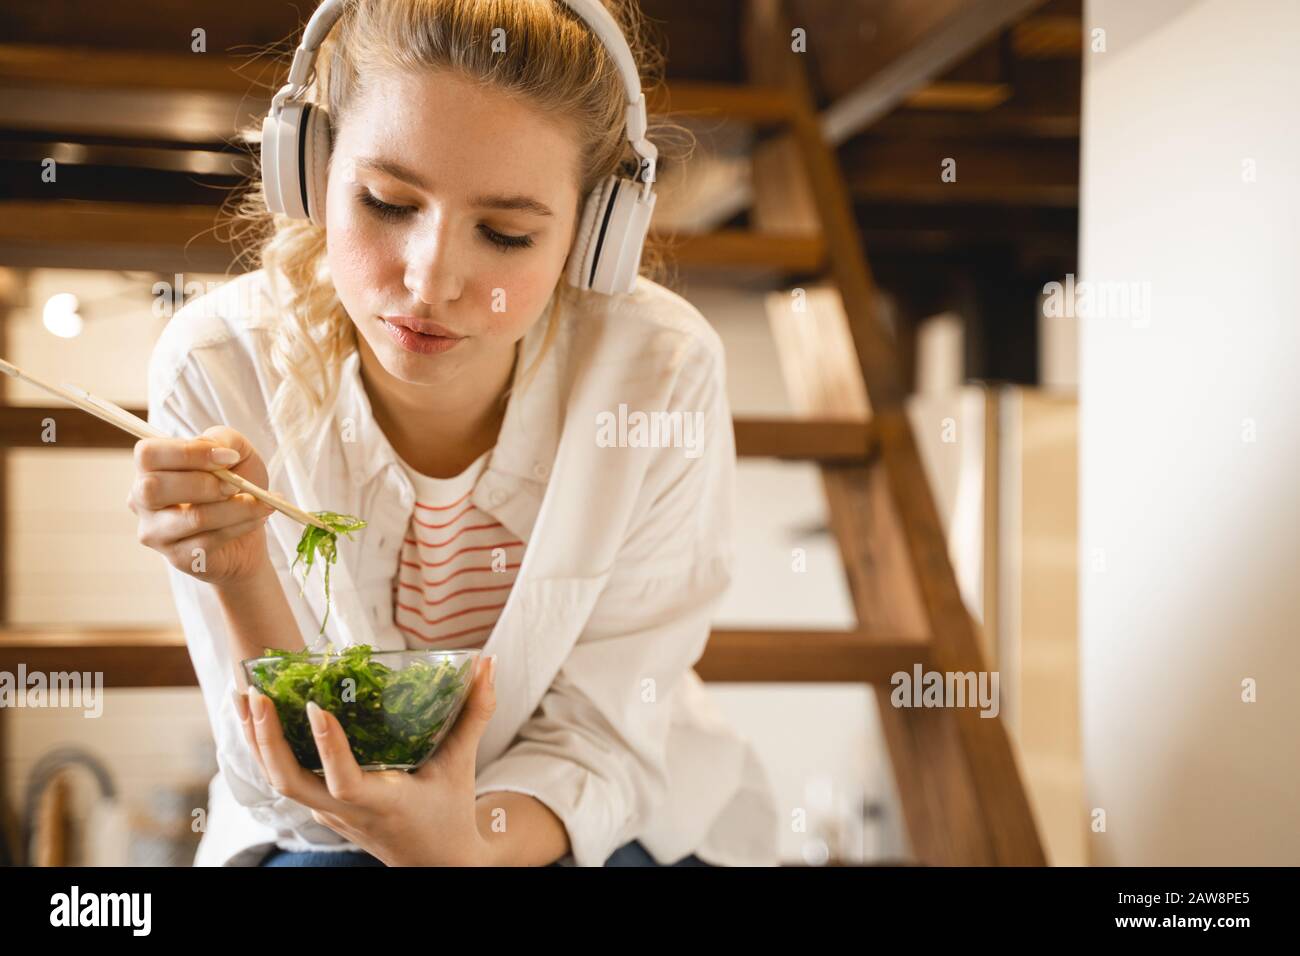 Attentive young woman looking into bowl with algae Stock Photo